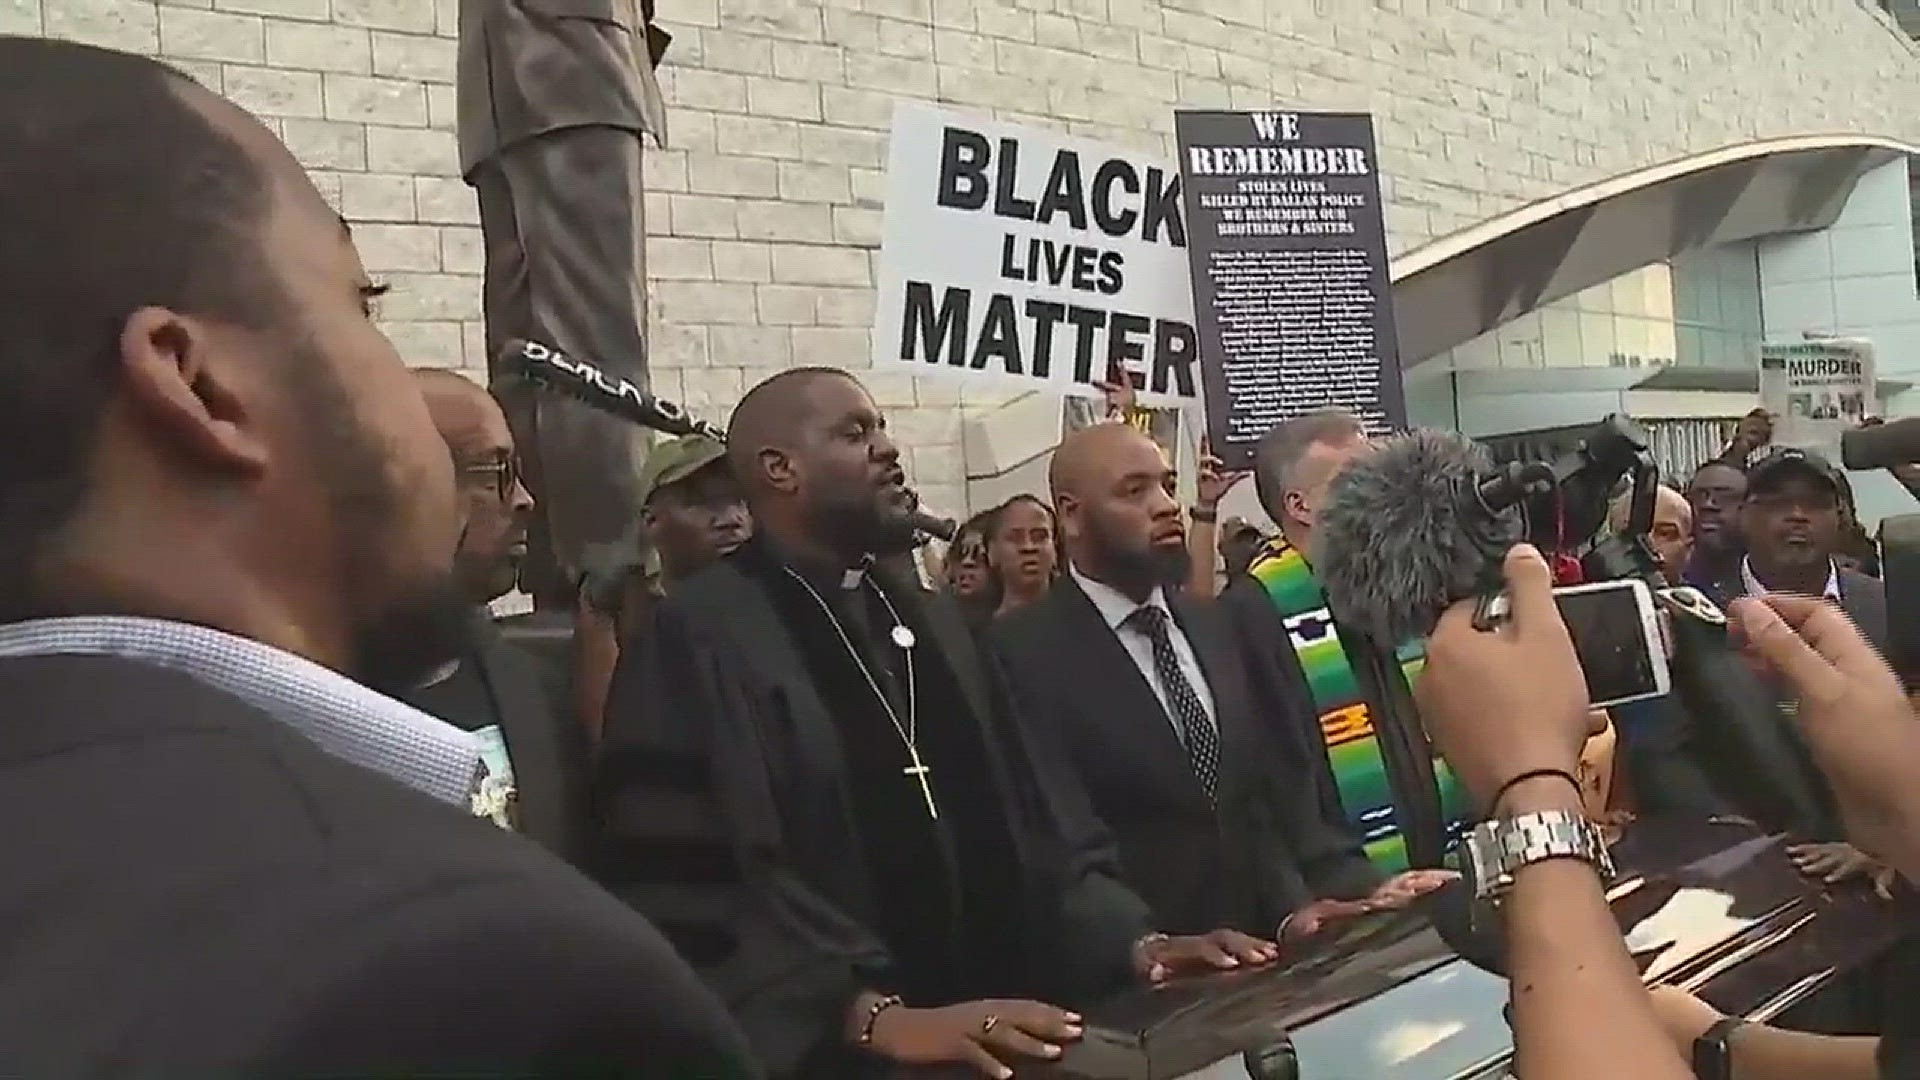 The protesters were rallying in support of Botham Jean outside of AT&T Stadium before the Cowboys-Giants game.